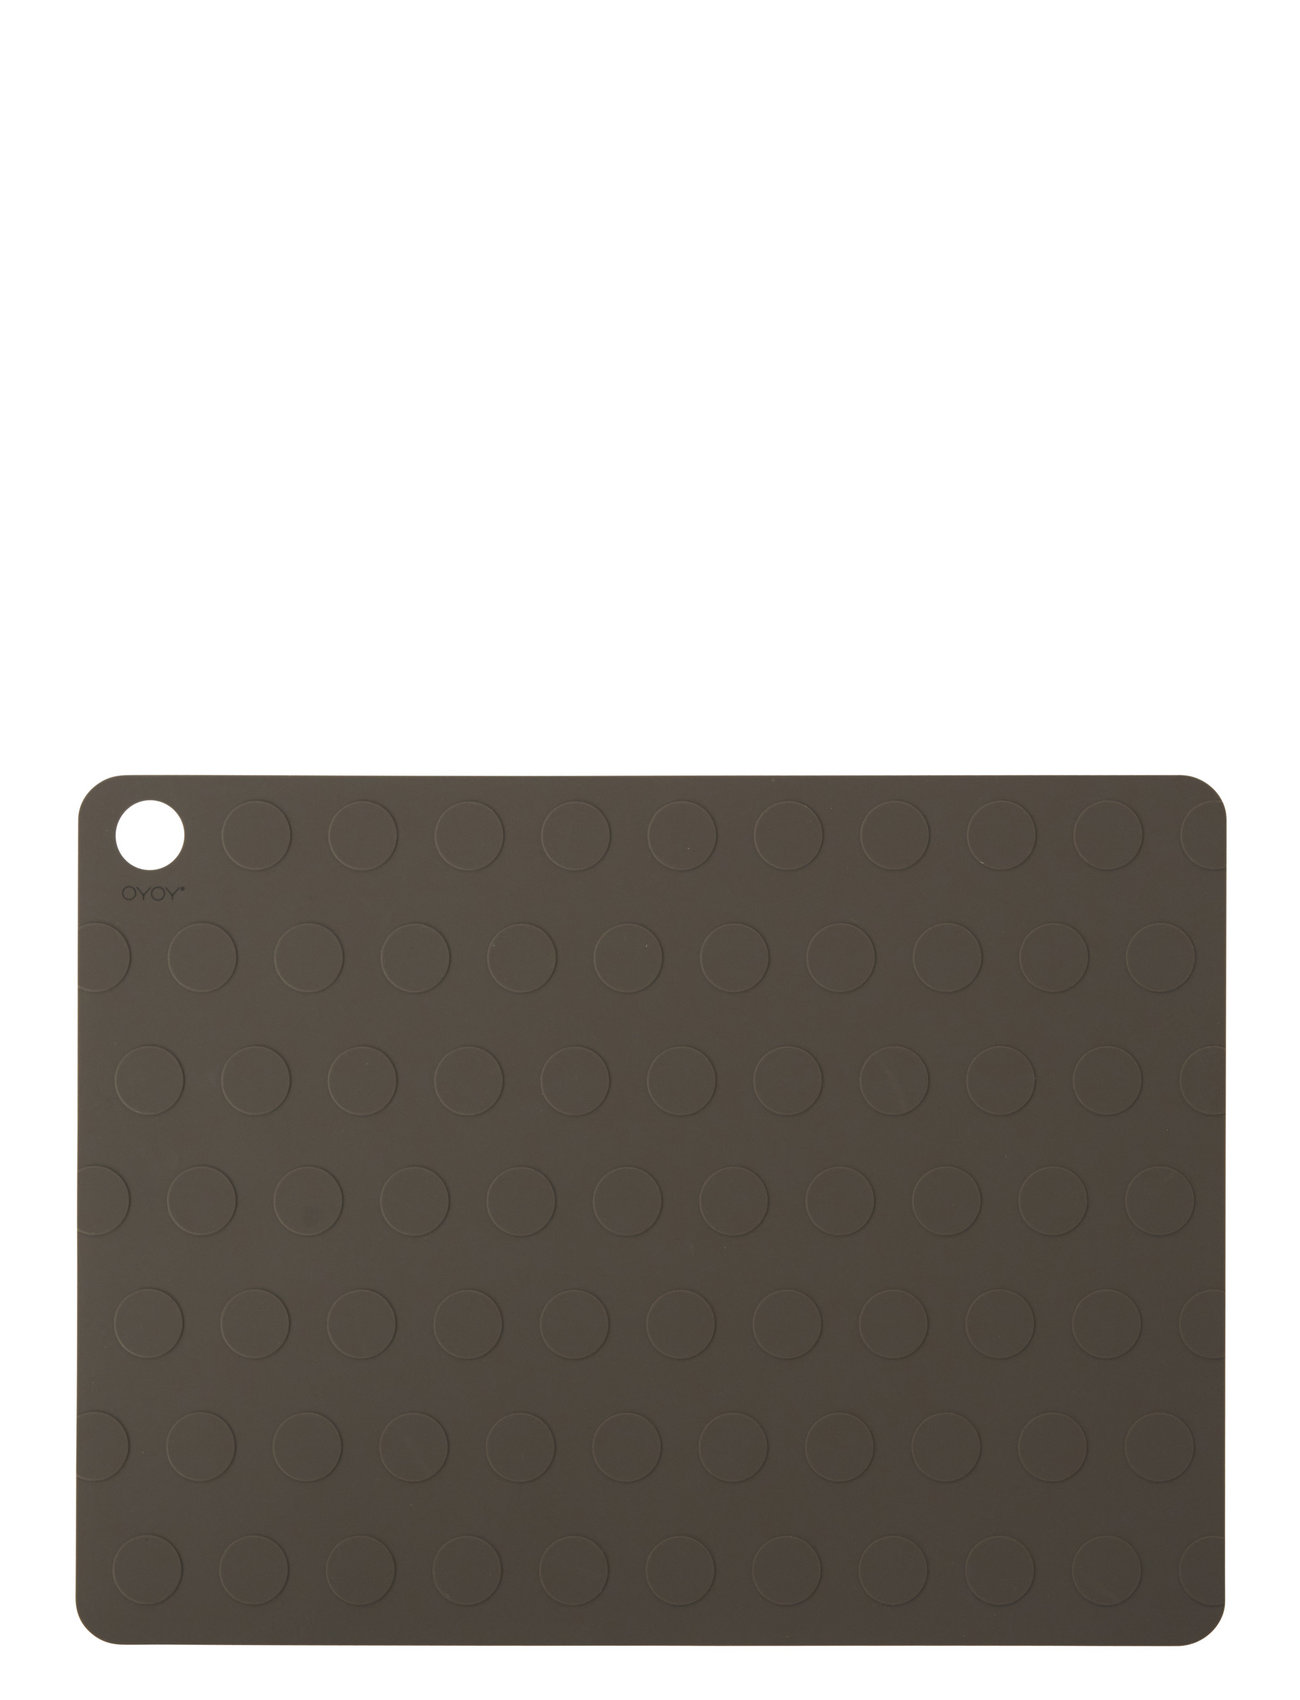 Dotto Placemat - Pack Of 2 Home Textiles Kitchen Textiles Placemats Brown OYOY Living Design